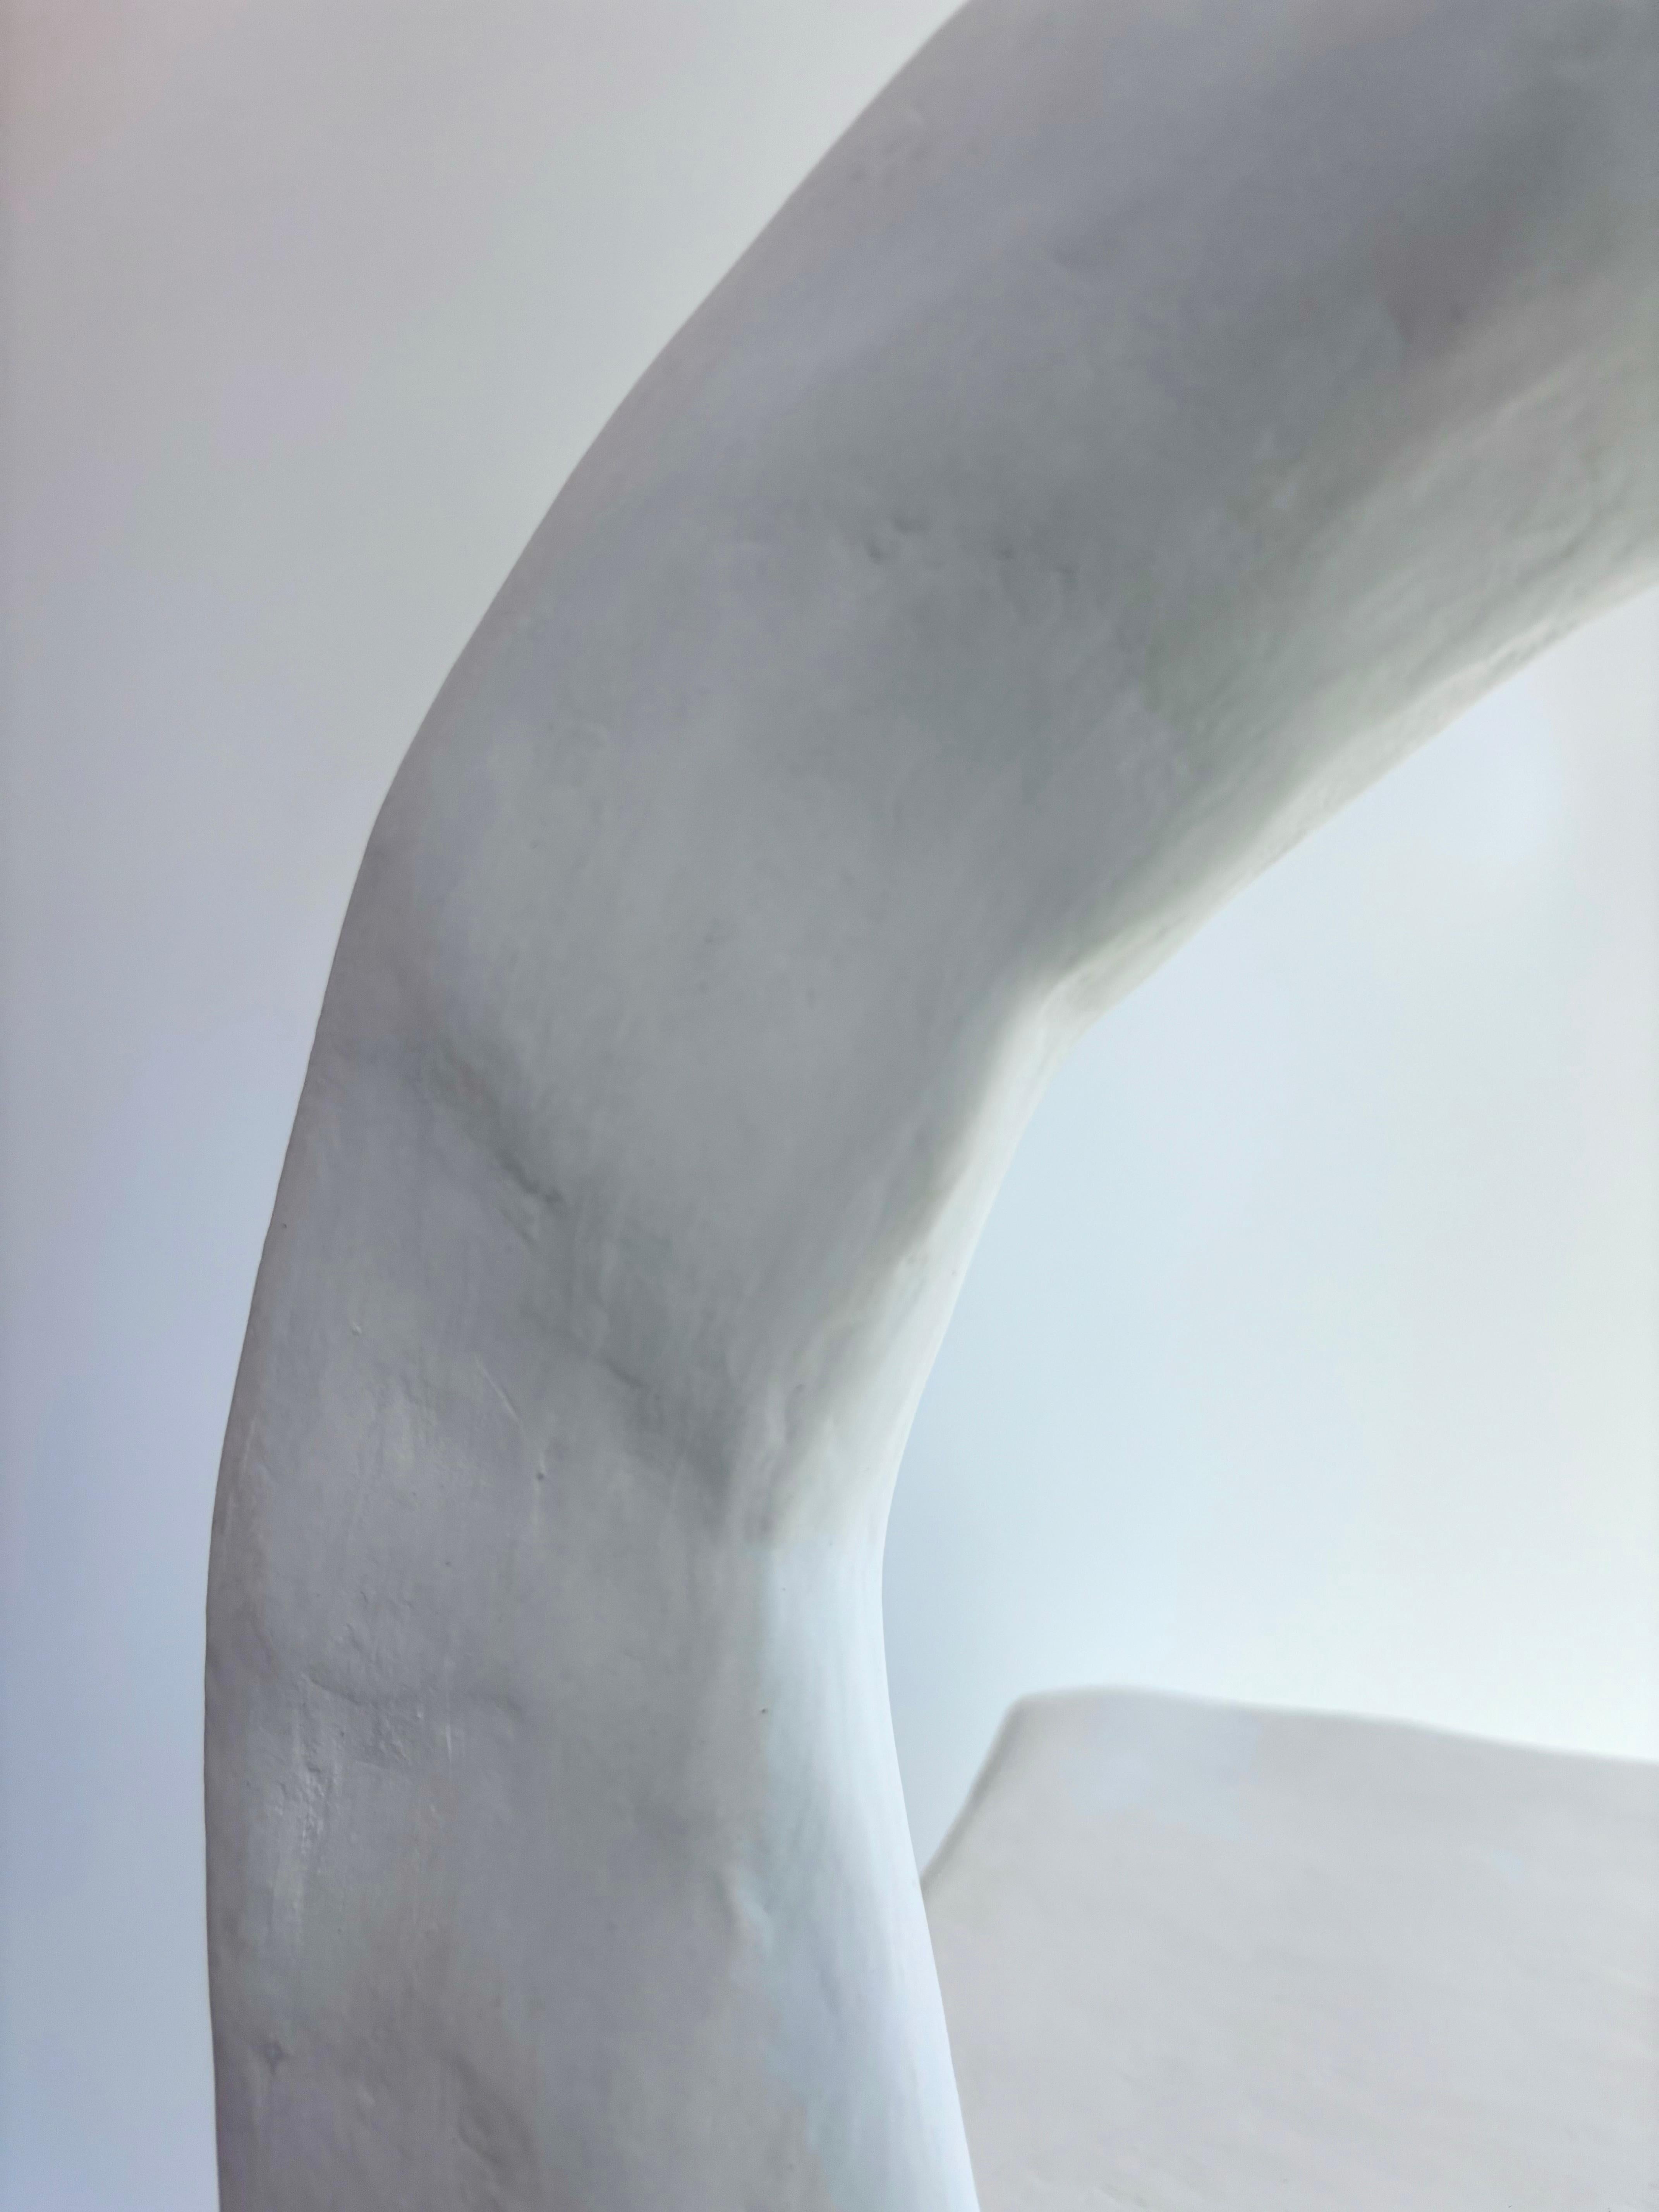 Biomorphic Line by Studio Chora, Functional Sculpture, White Plaster Chair For Sale 5